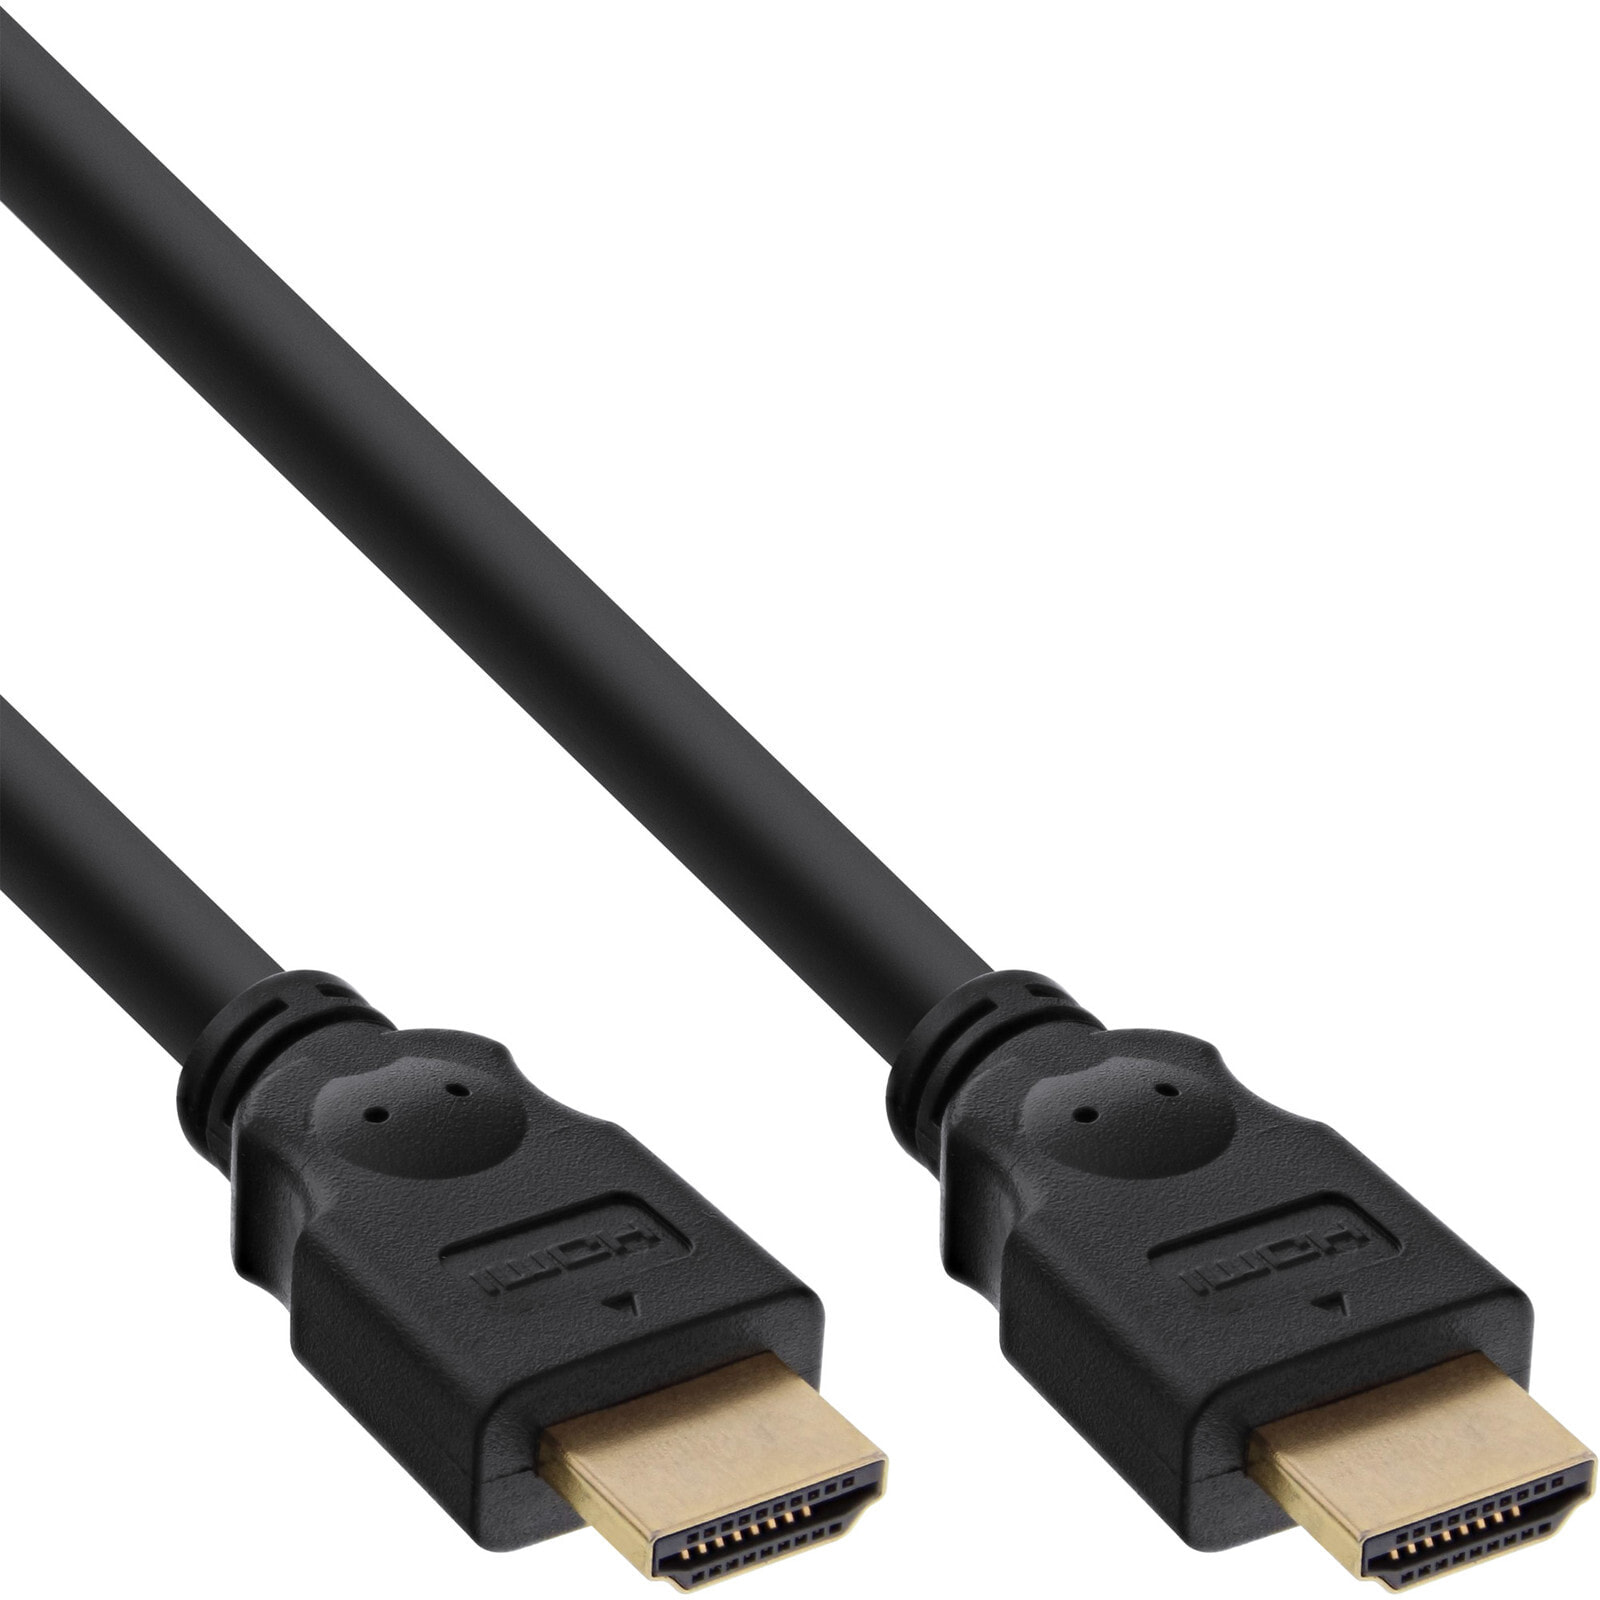 40pcs. Bulk-Pack HDMI High Speed Cable male to male gold plated black 2m - 2 m - HDMI Type A (Standard) - HDMI Type A (Standard) - 10.2 Gbit/s - Black